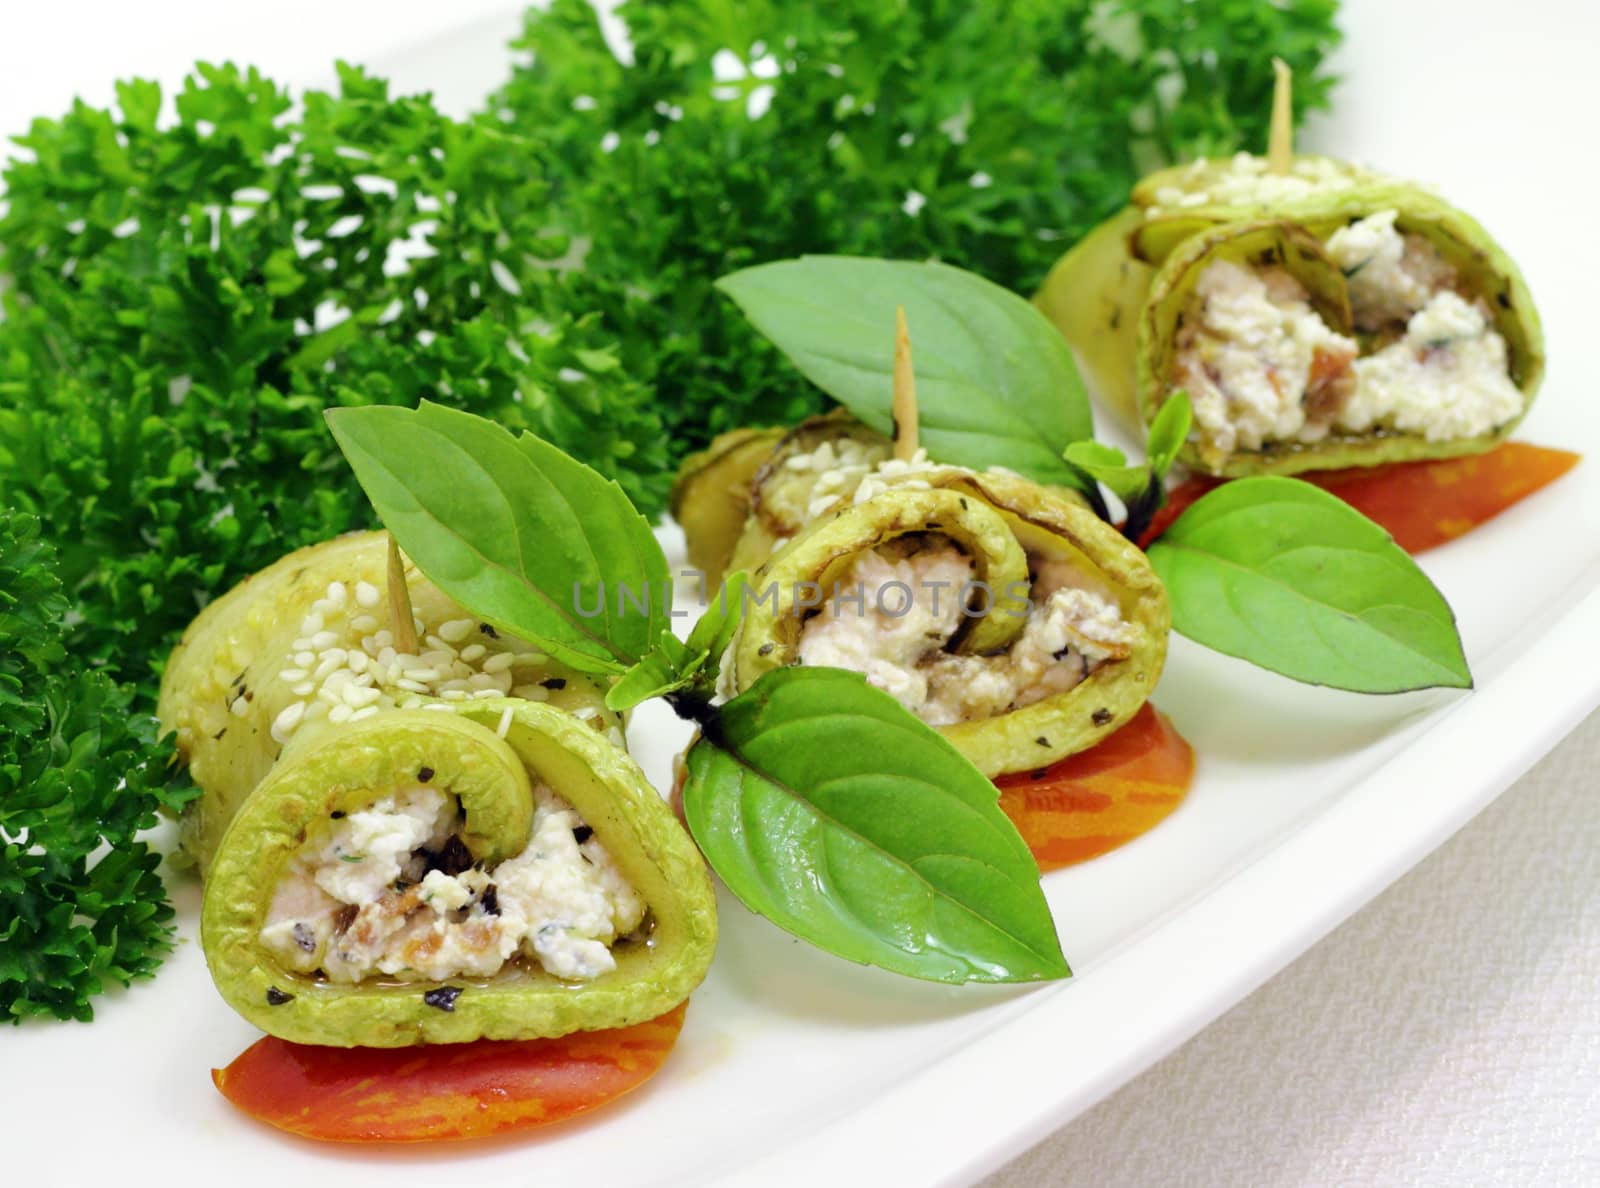 Zucchini roll with cottage cheese and herbs